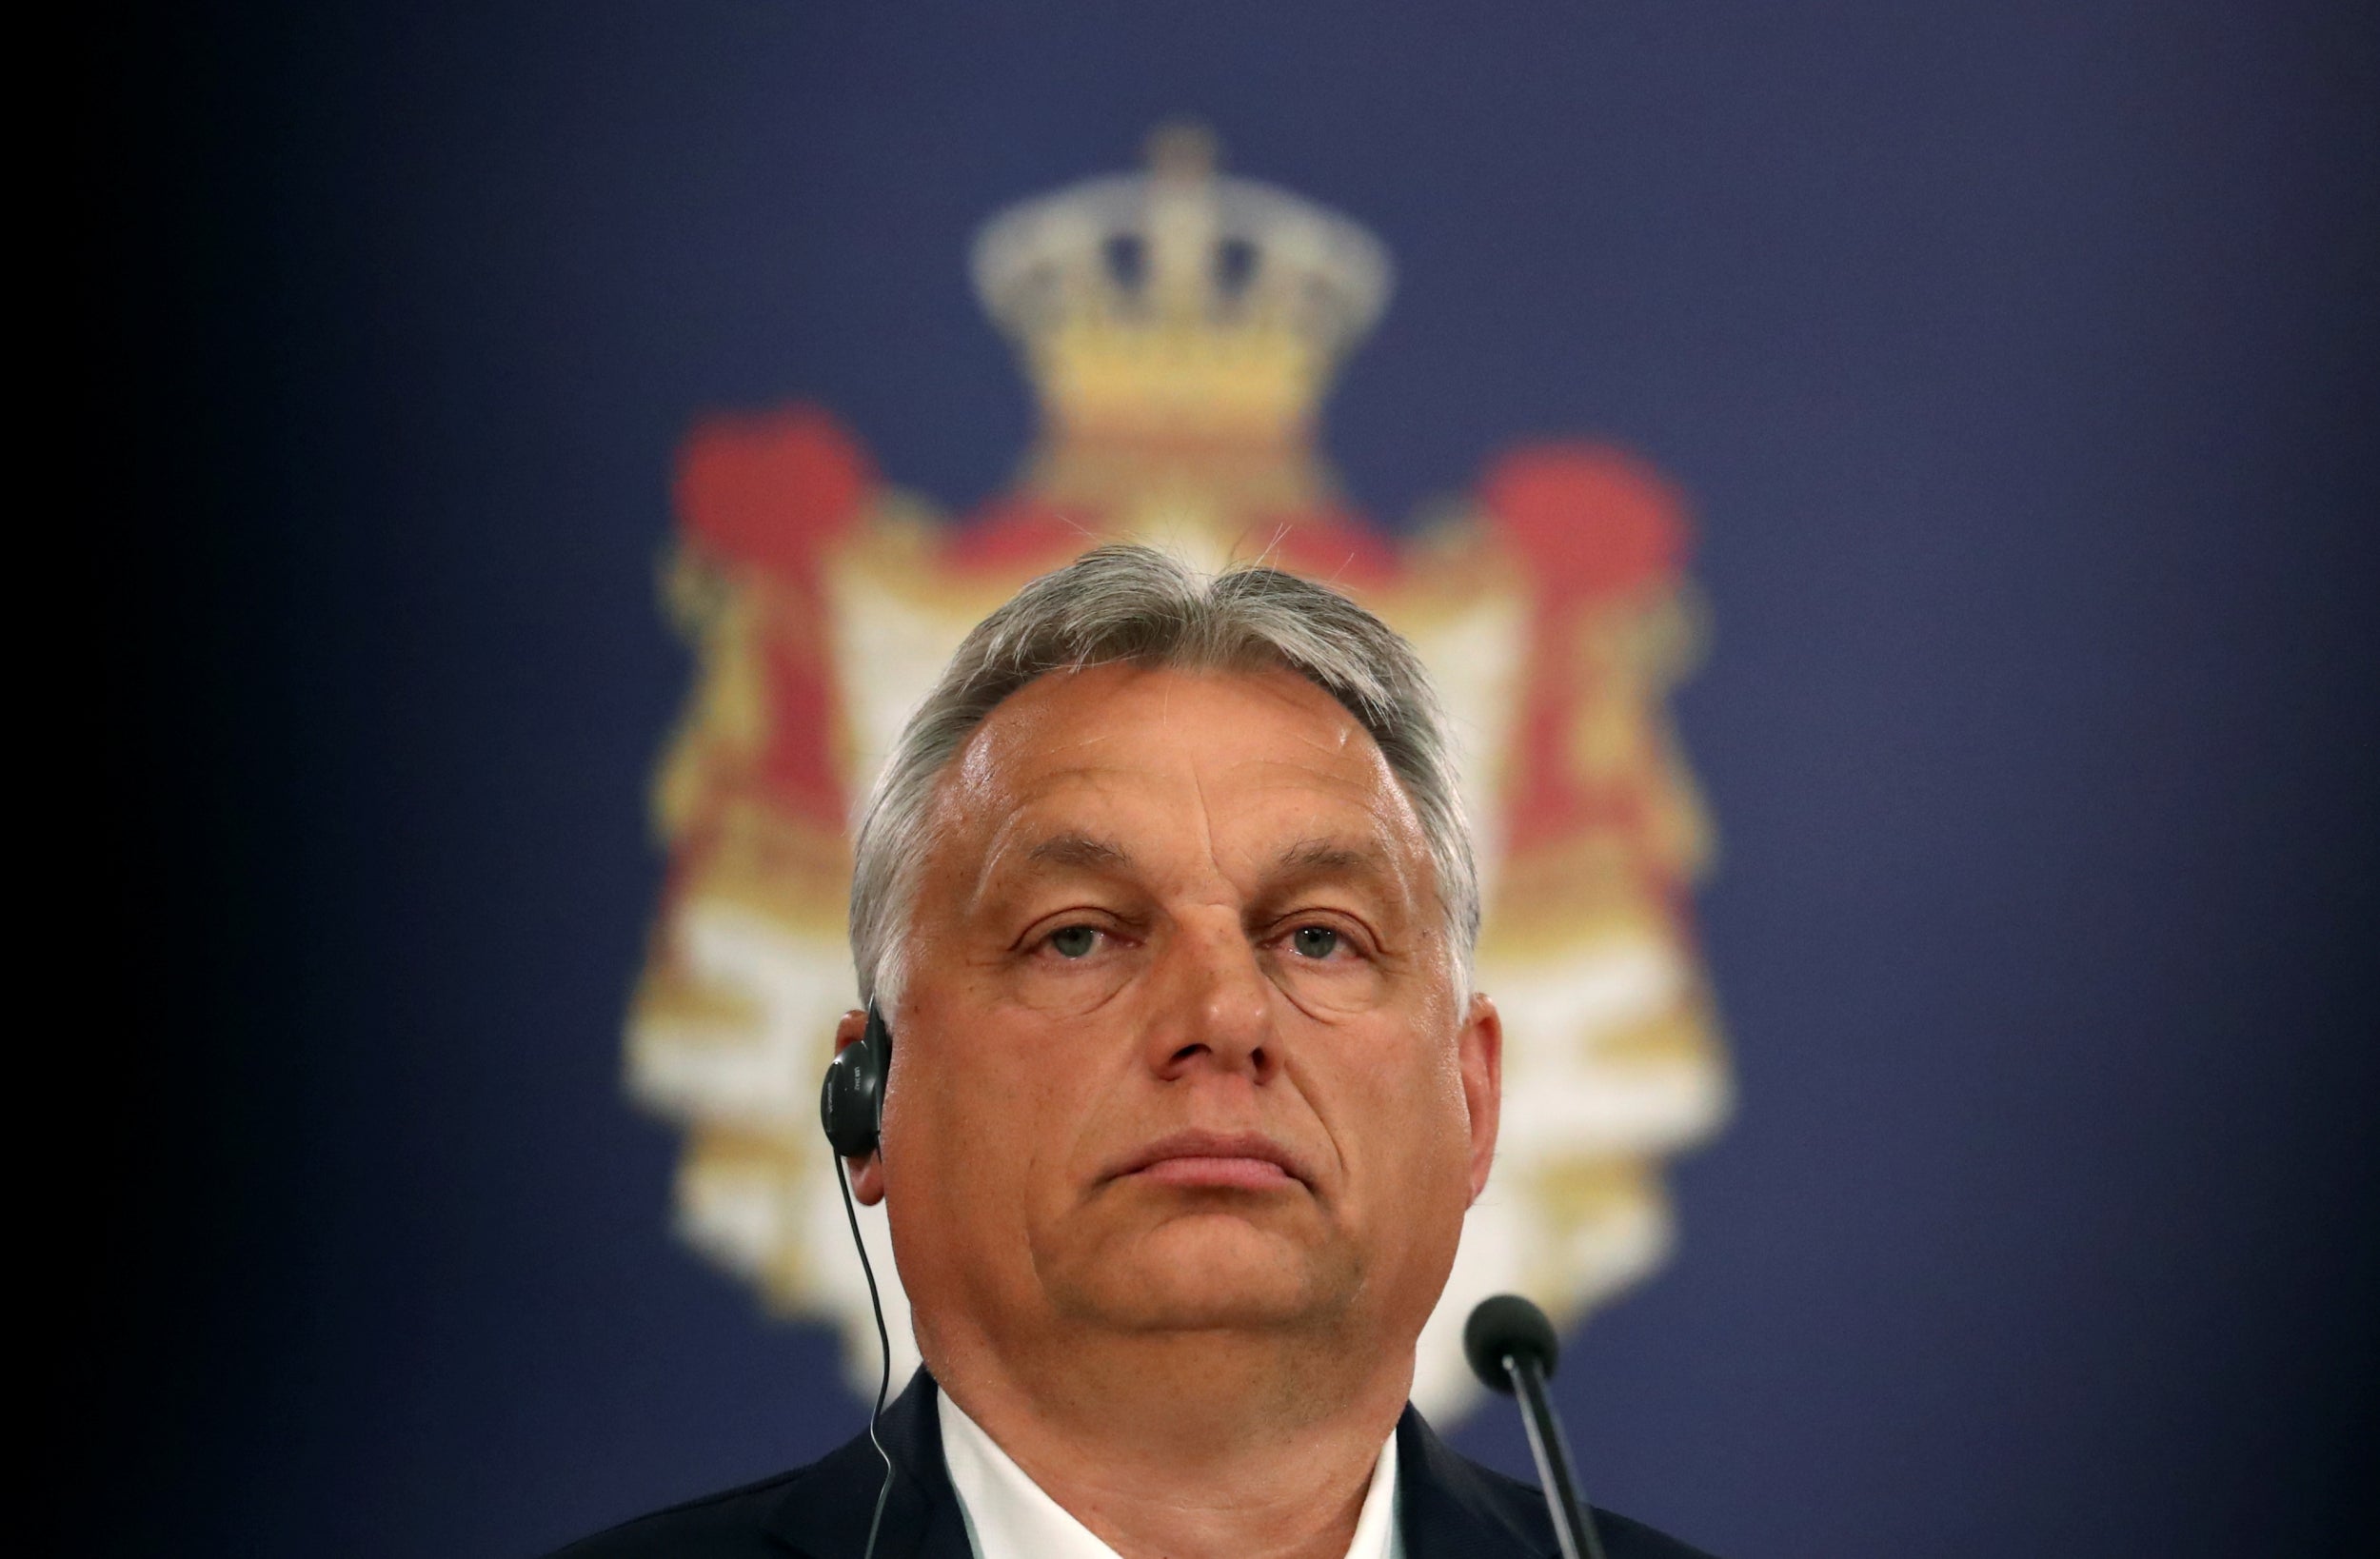 Independent publication Index fell victim to the machinations of Viktor Orban’s far-right authoritarian regime